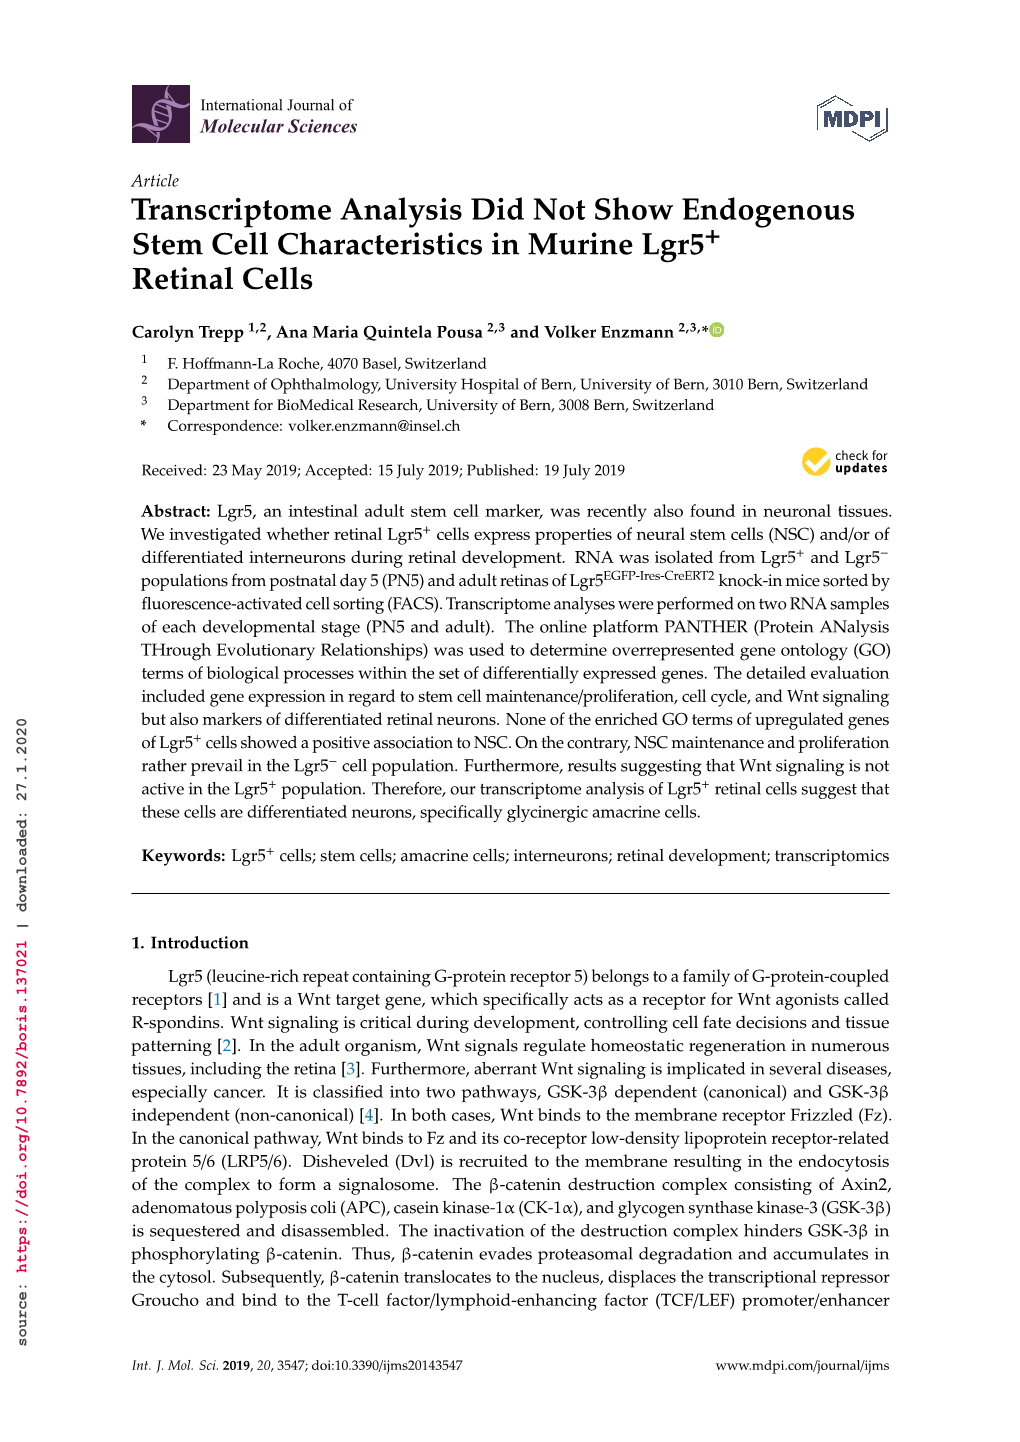 Transcriptome Analysis Did Not Show Endogenous Stem Cell Characteristics in Murine Lgr5+ Retinal Cells